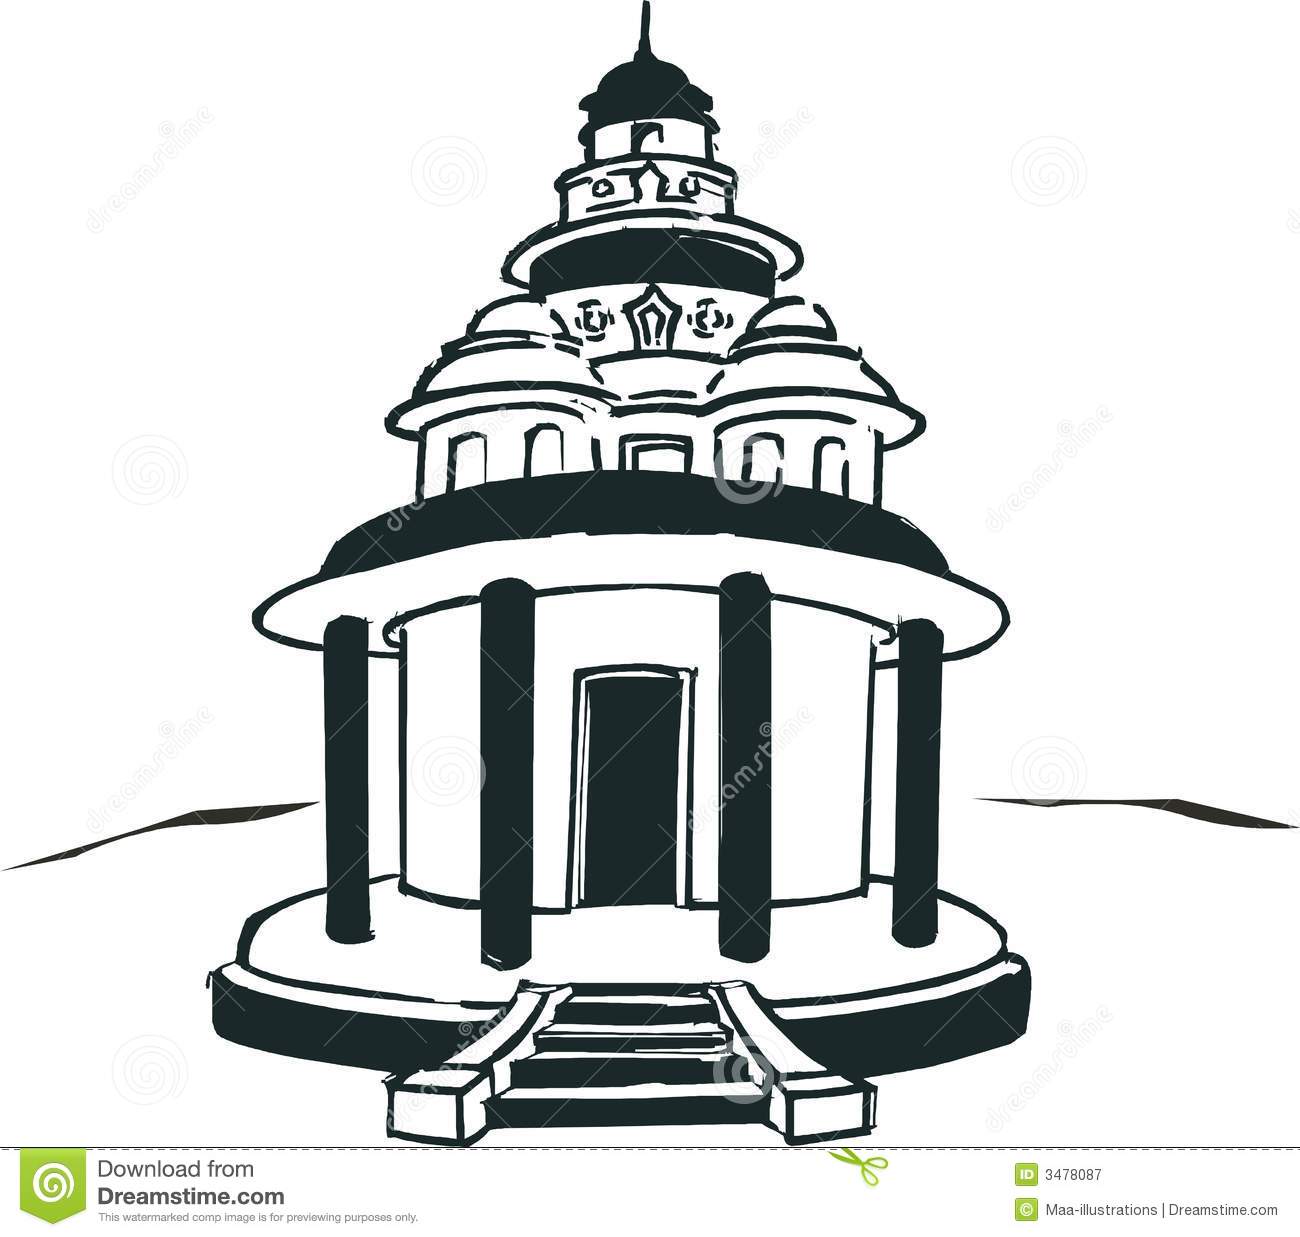 Temple clipart #11, Download drawings